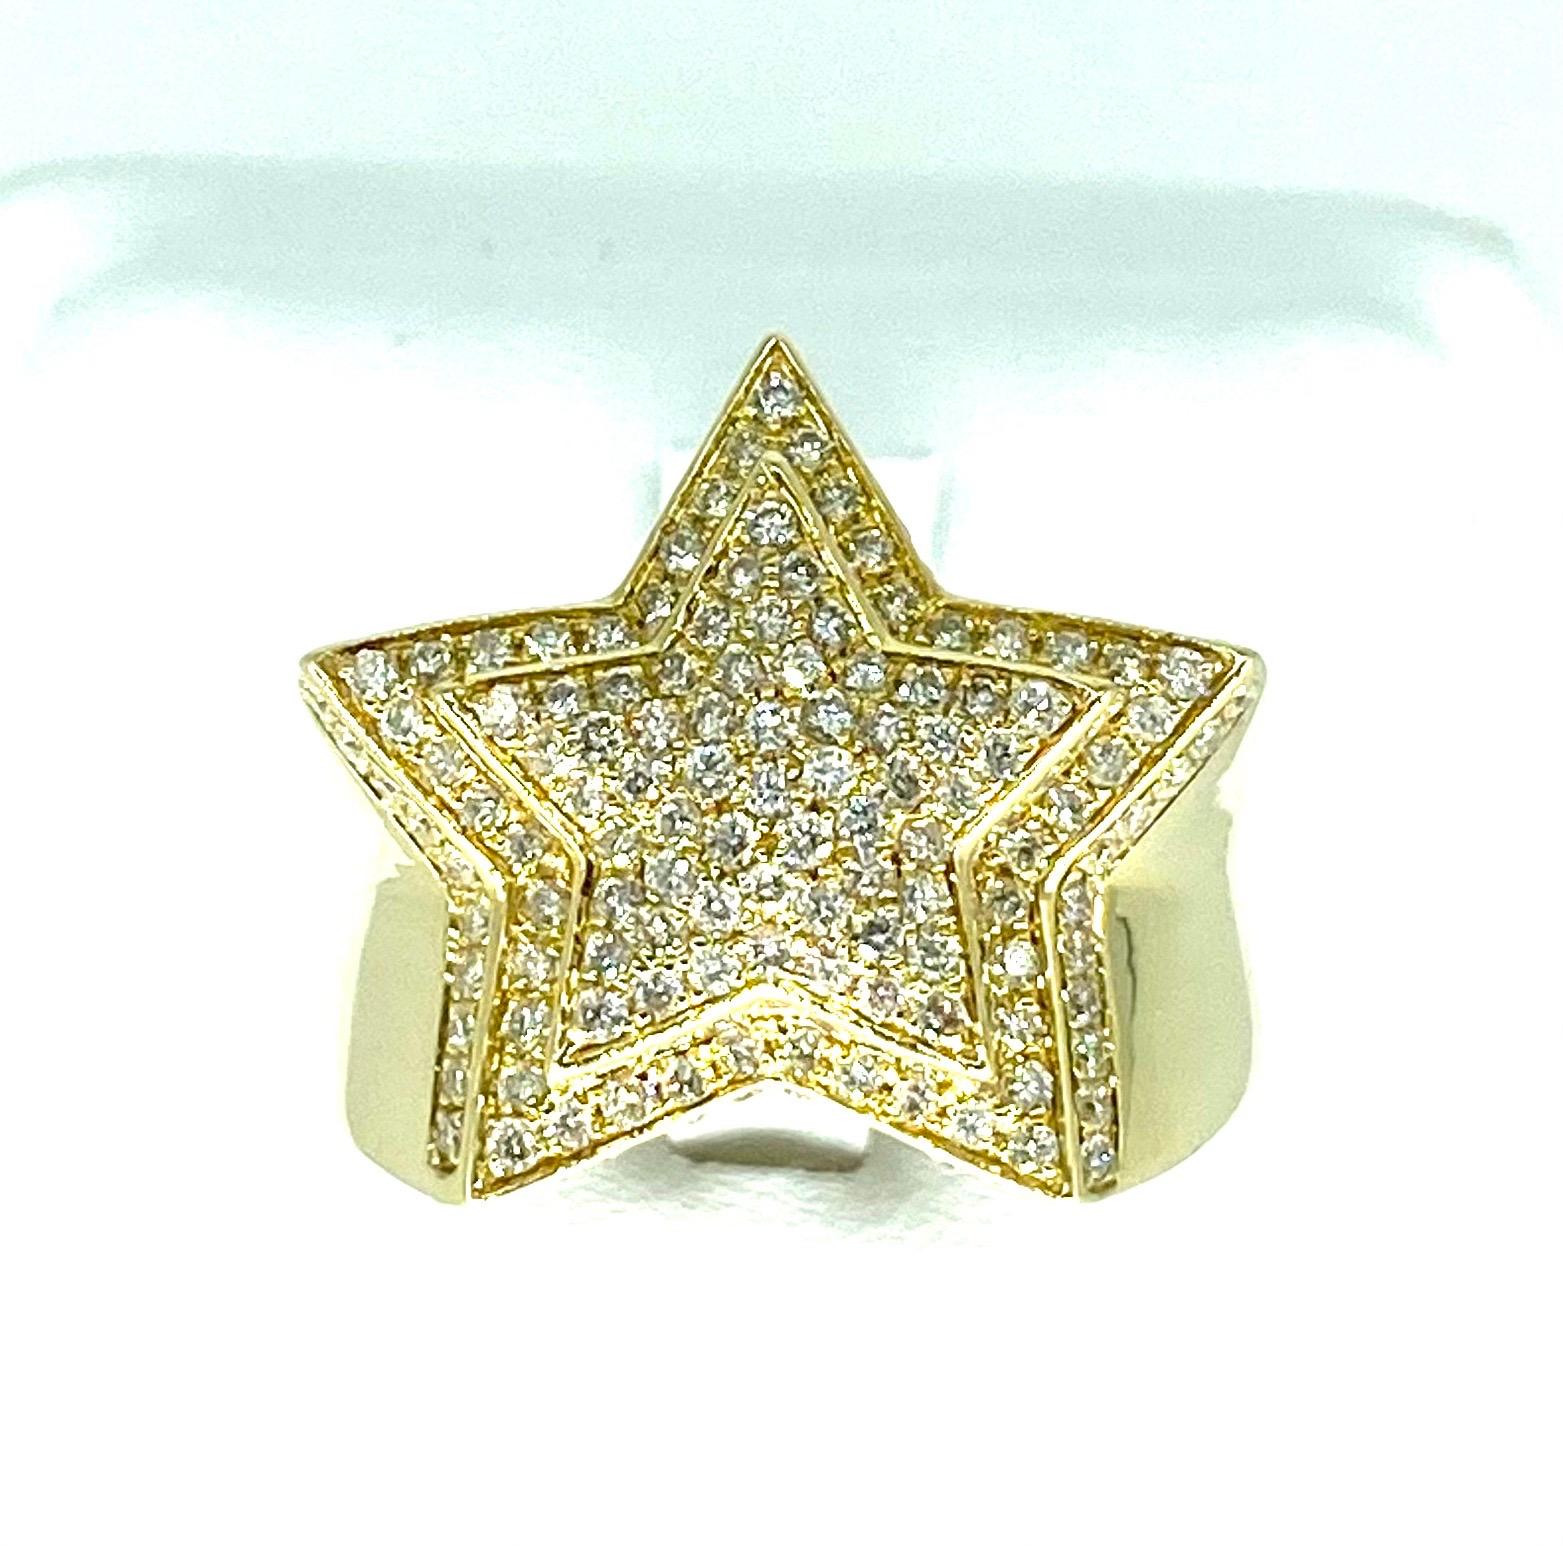 5 point star ring